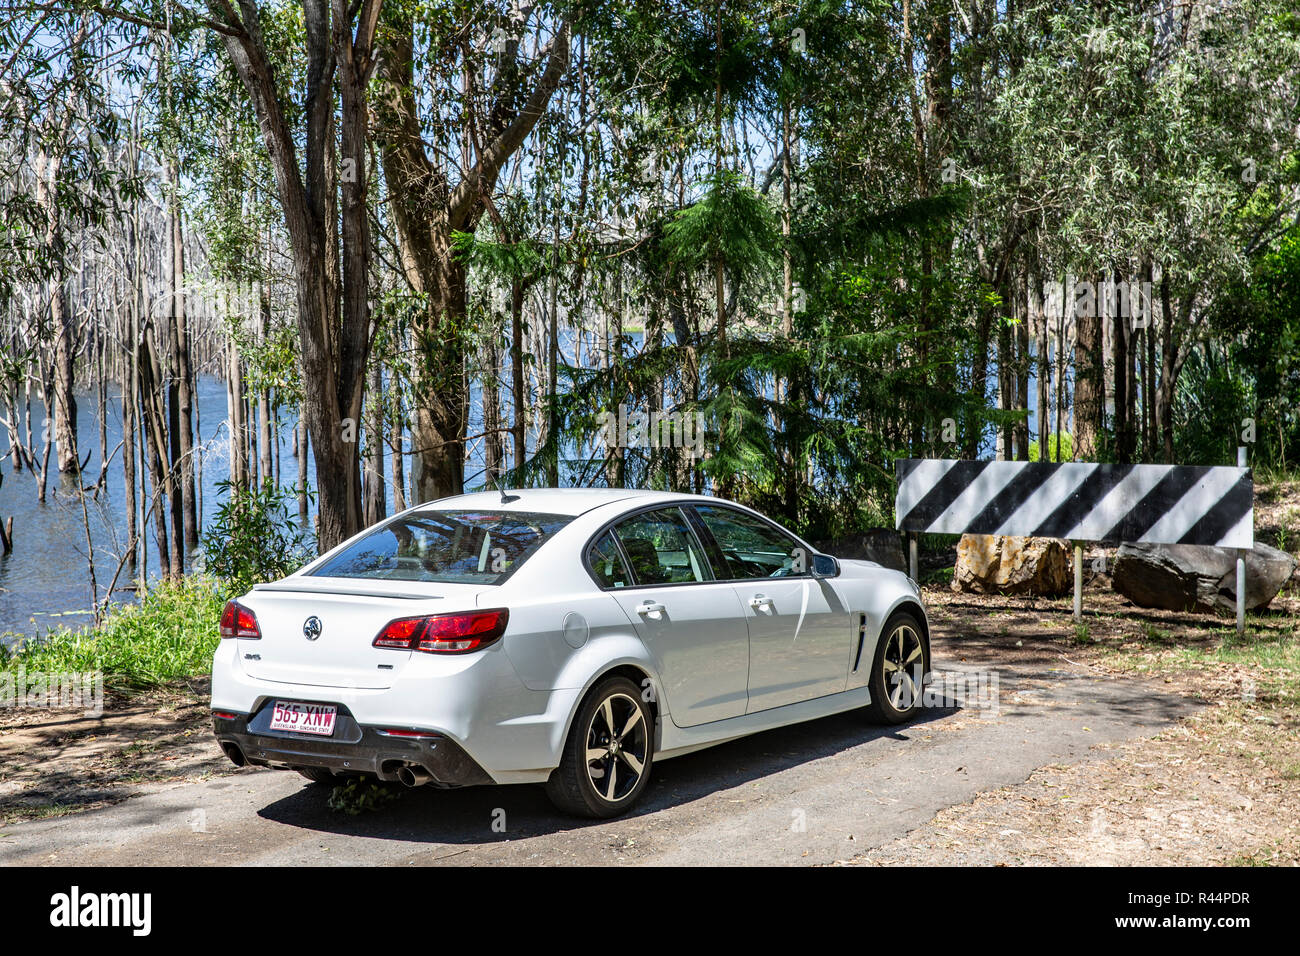 White saloon Holden commodore sv6 motor vehicle parked in Queensland,Australia Stock Photo